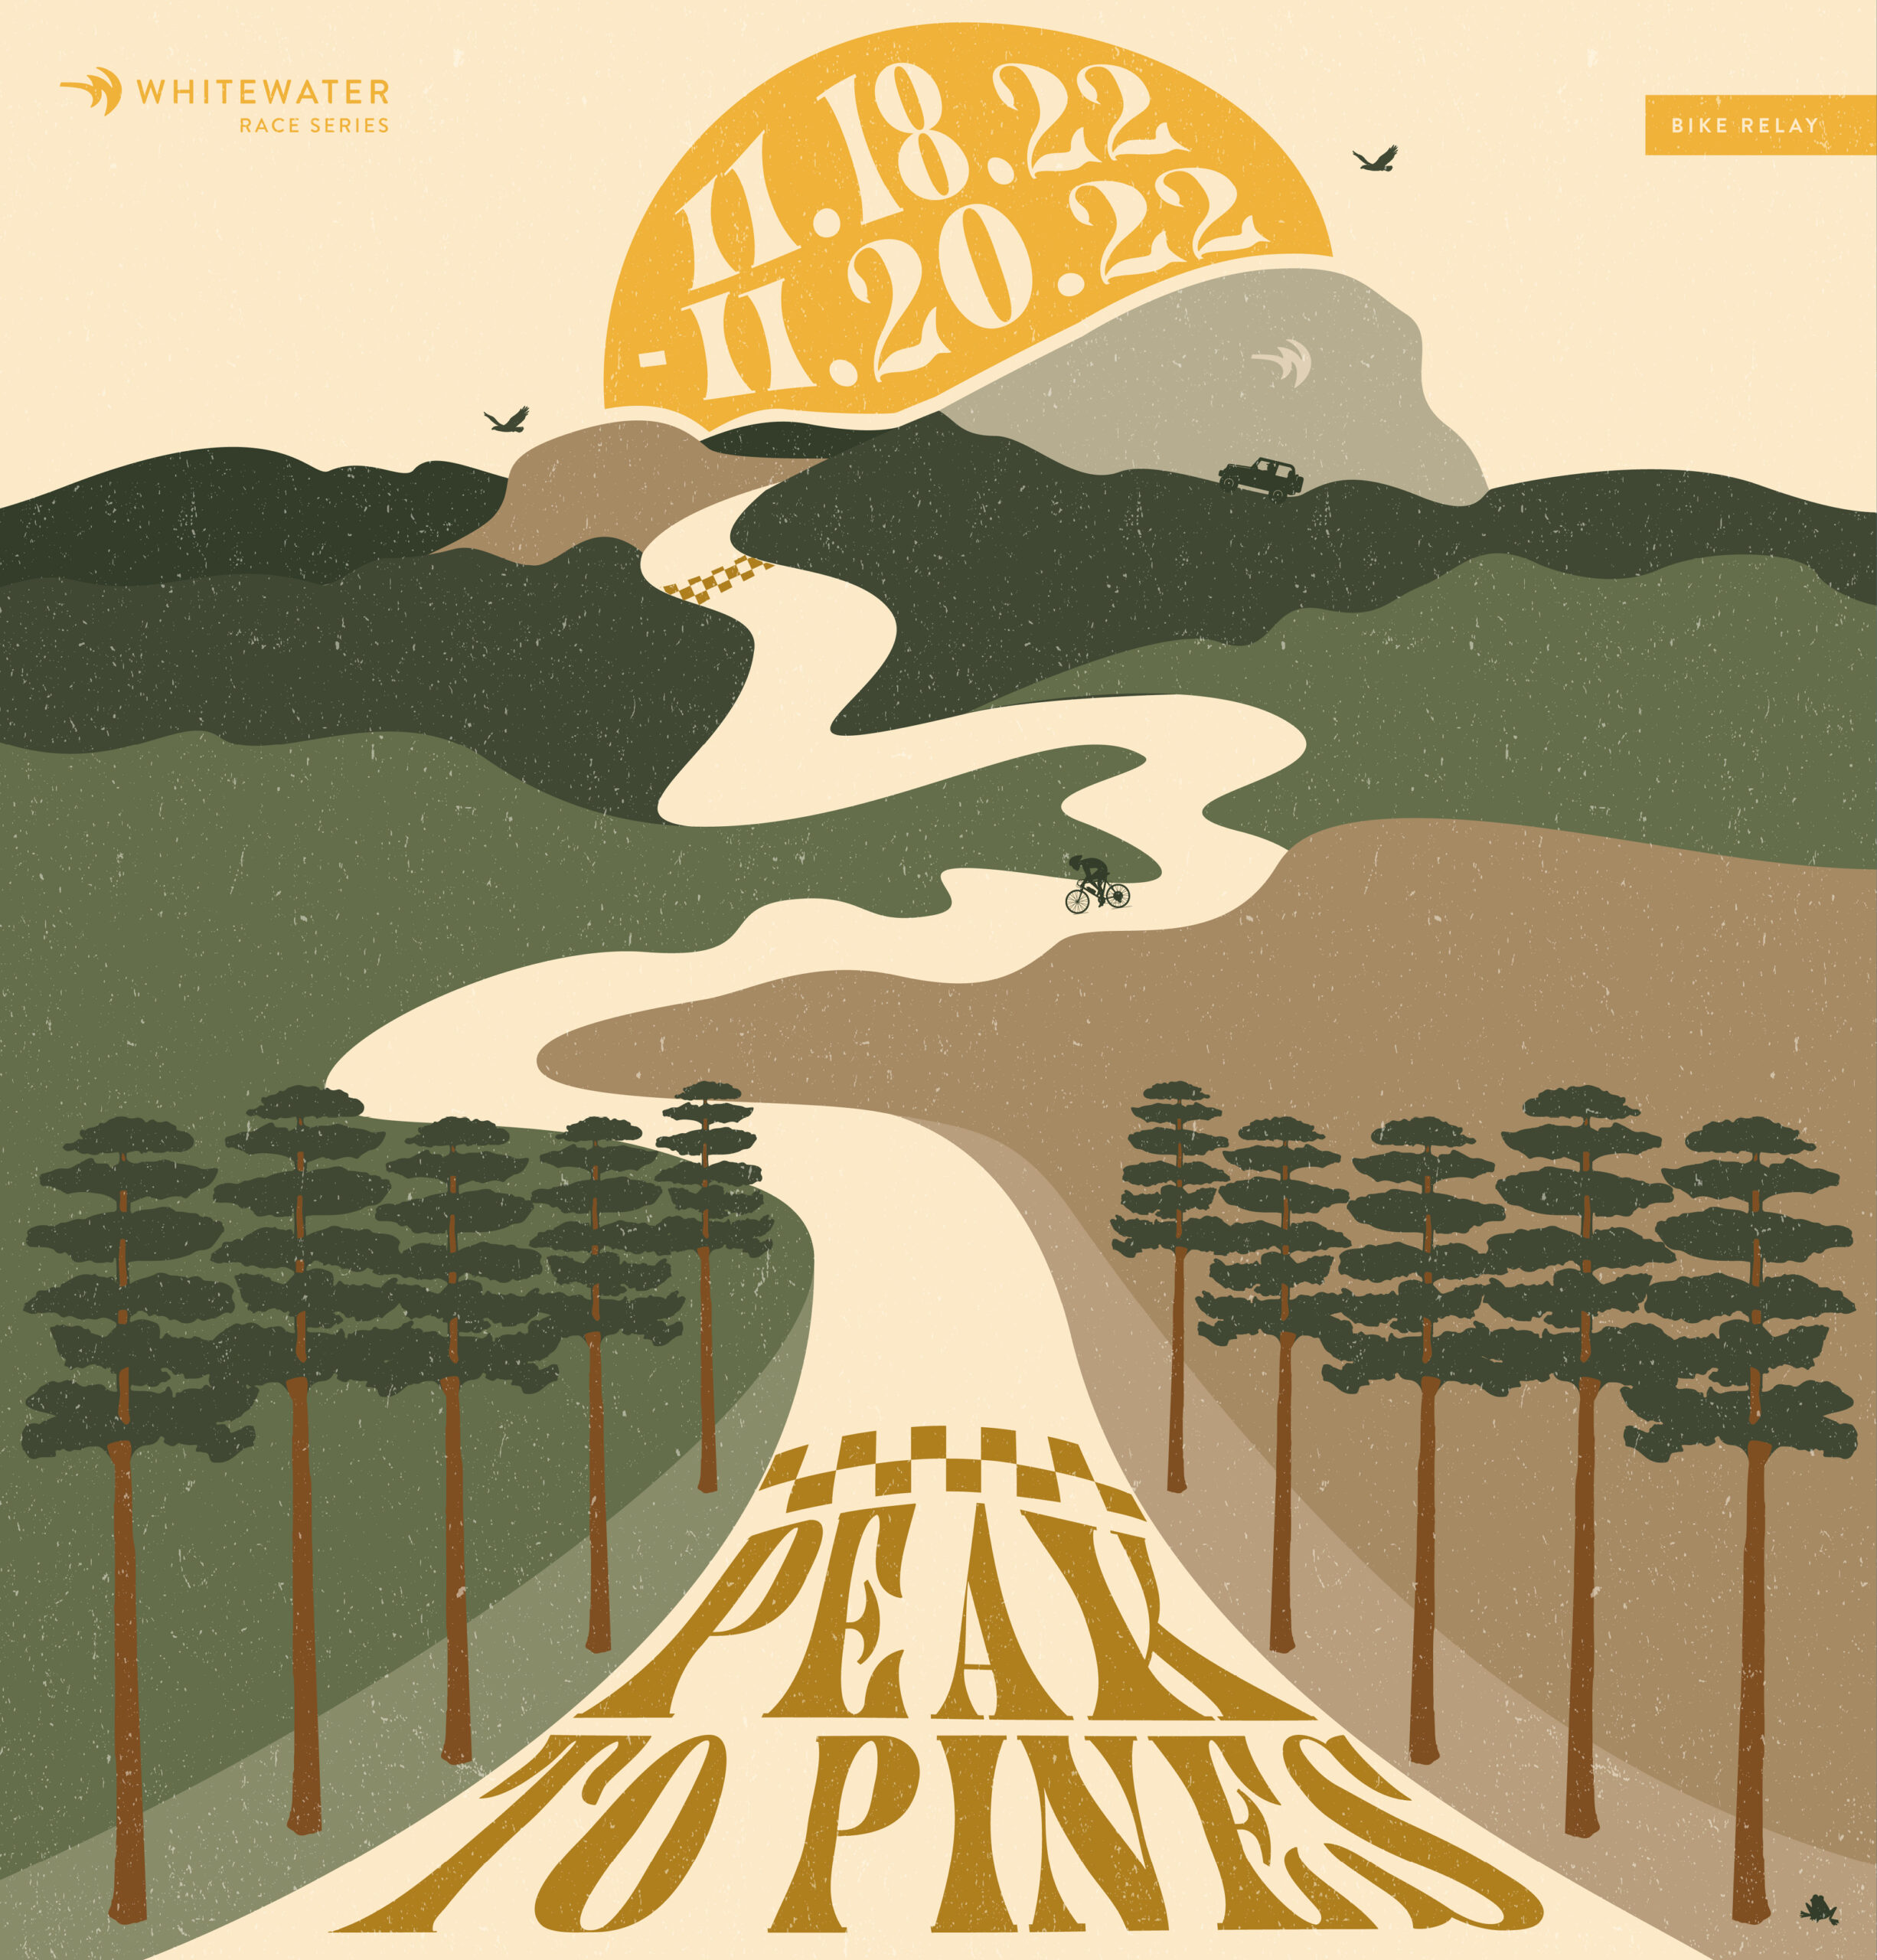 https://whitewater.org/wp-content/uploads/2022/08/RACE-SERIES_PEAK-TO-PINES_766X800-scaled.jpg